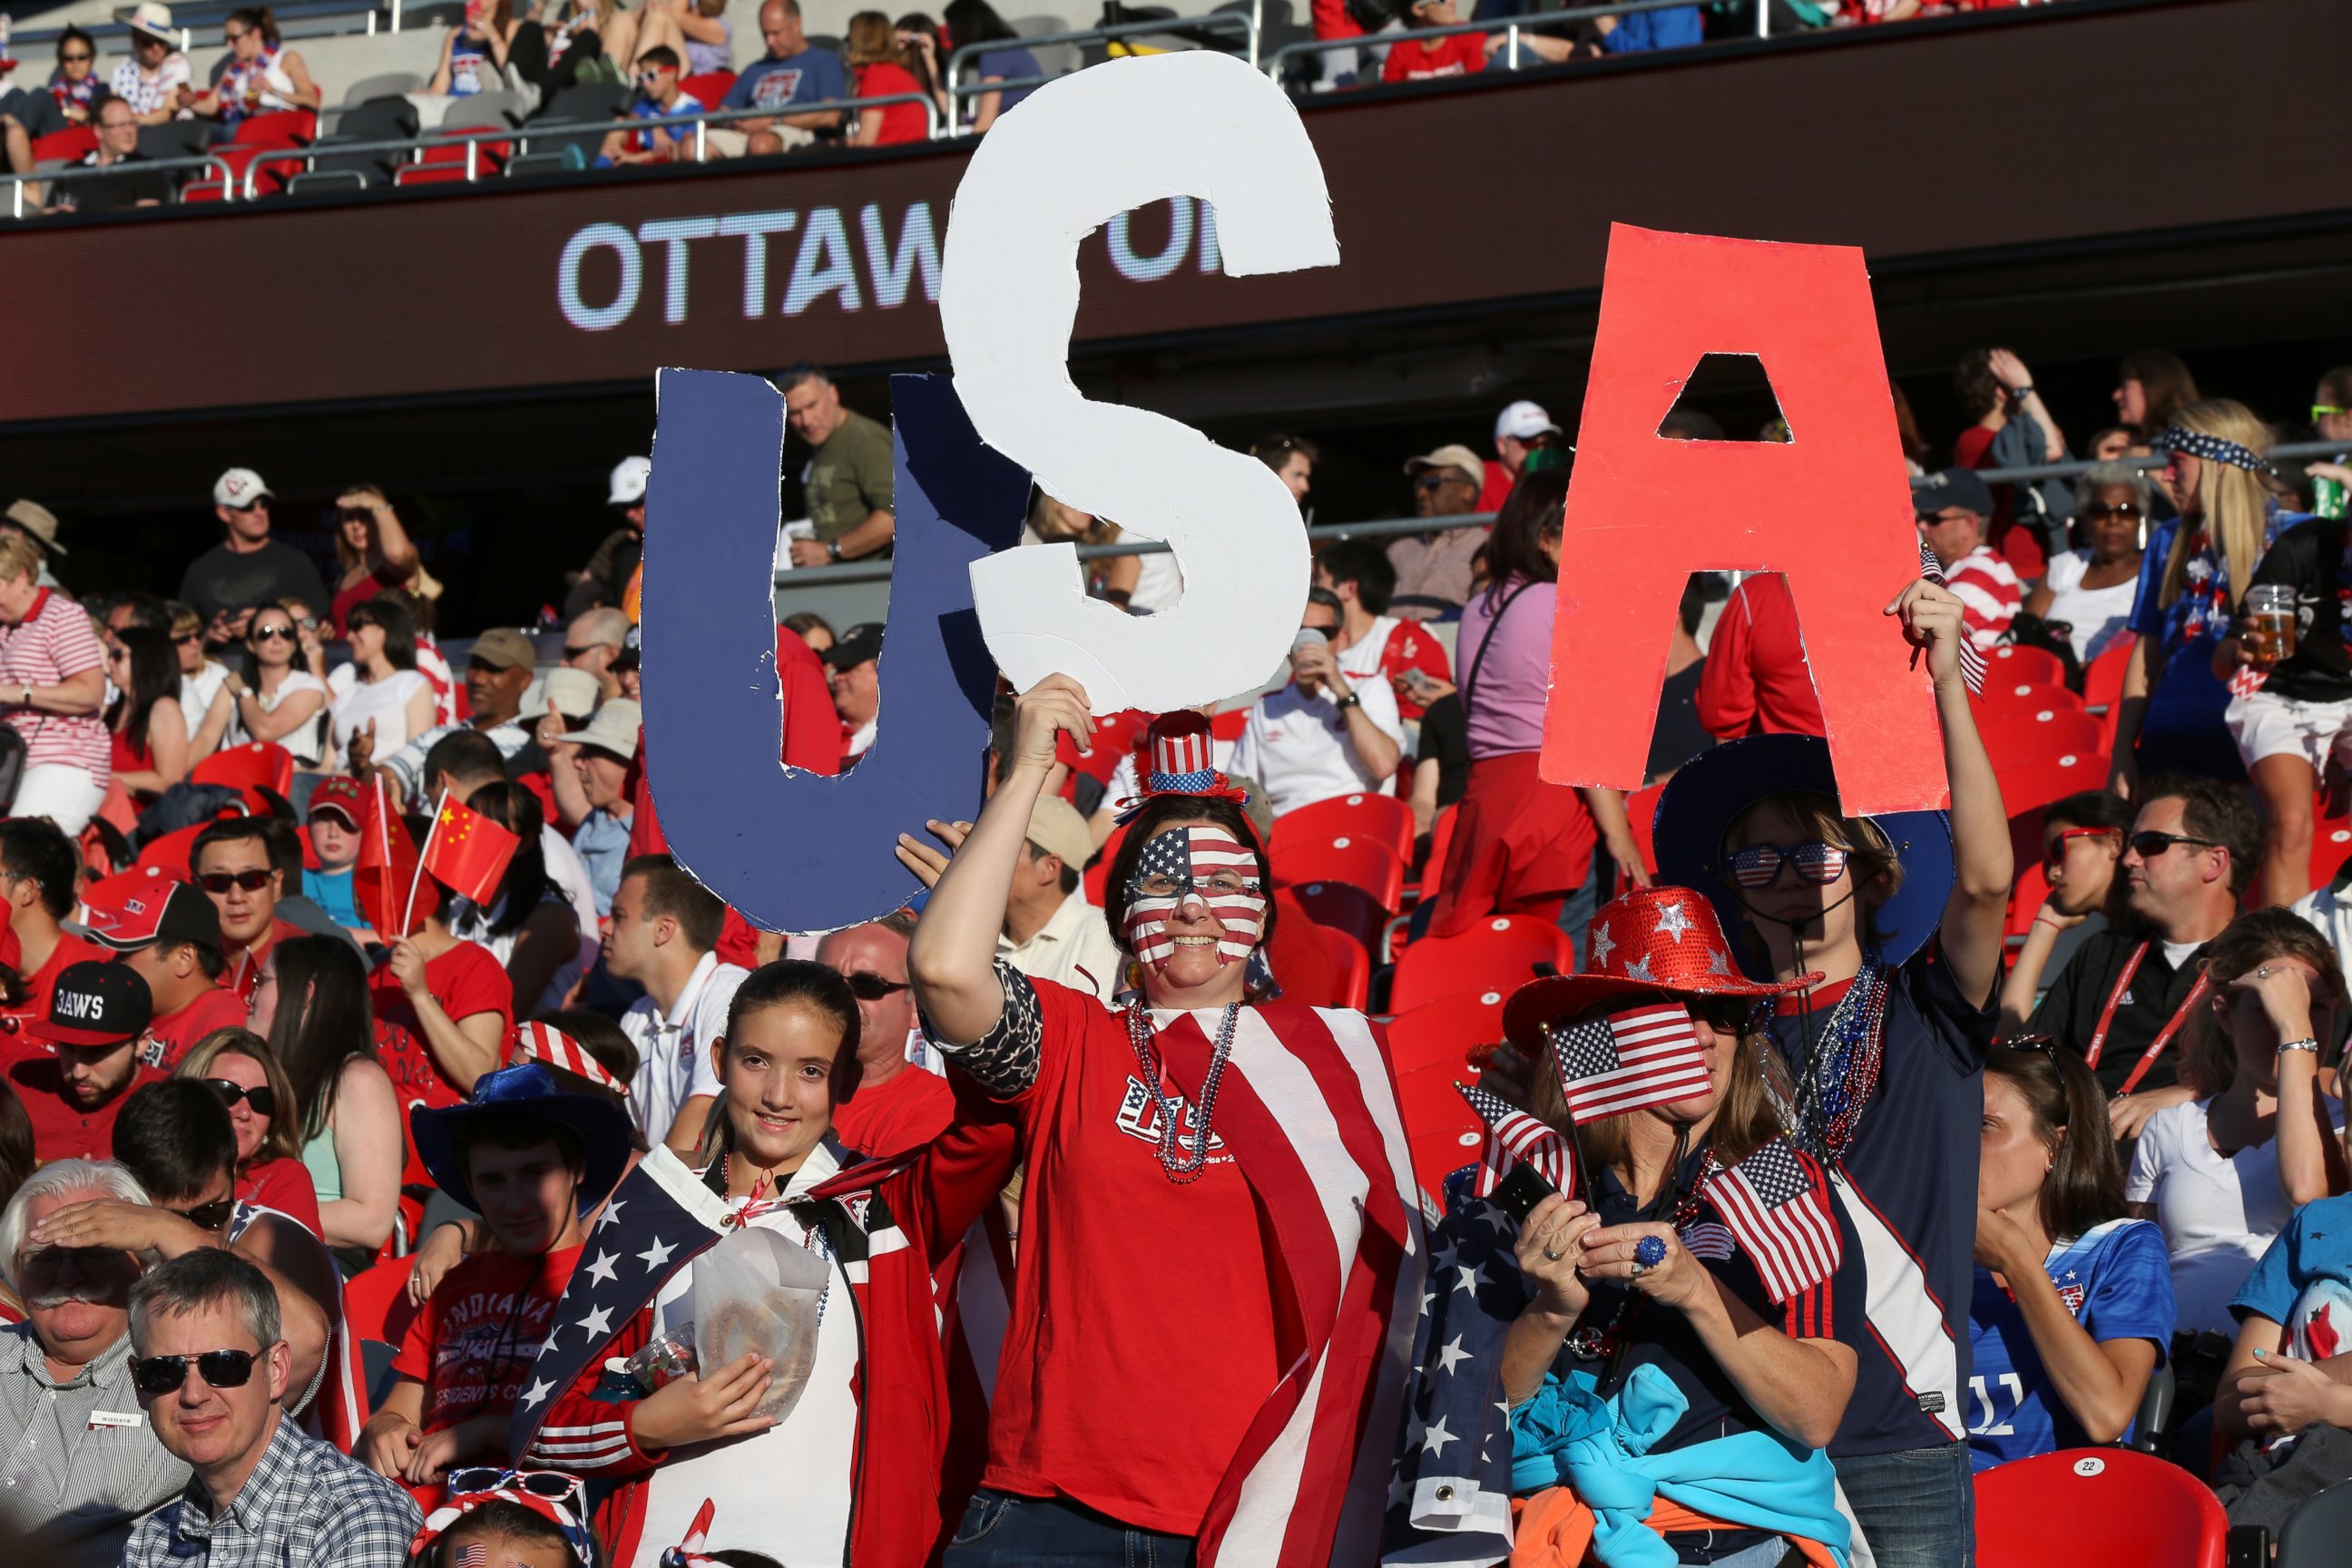 PHOTO: Fans of the United States cheer in the first half against China in the FIFA Women's World Cup 2015 Quarter Final match at Lansdowne Stadium on June 26, 2015 in Ottawa, Canada.